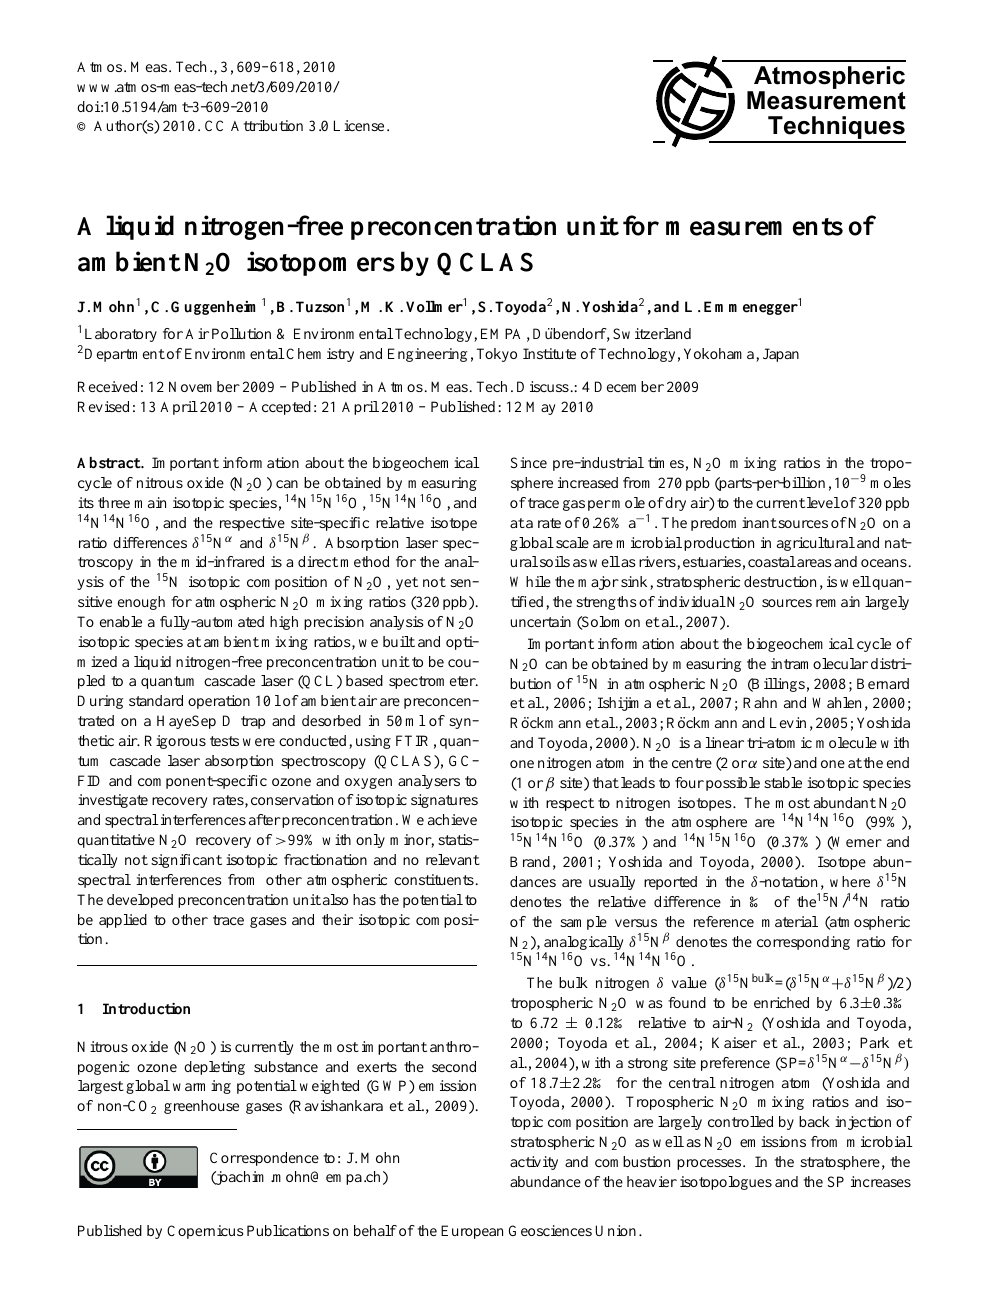 A Liquid Nitrogen Free Preconcentration Unit For Measurements Of Ambient N Sub 2 Sub O Isotopomers By Qclas Topic Of Research Paper In Chemical Sciences Download Scholarly Article Pdf And Read For Free On Cyberleninka Open